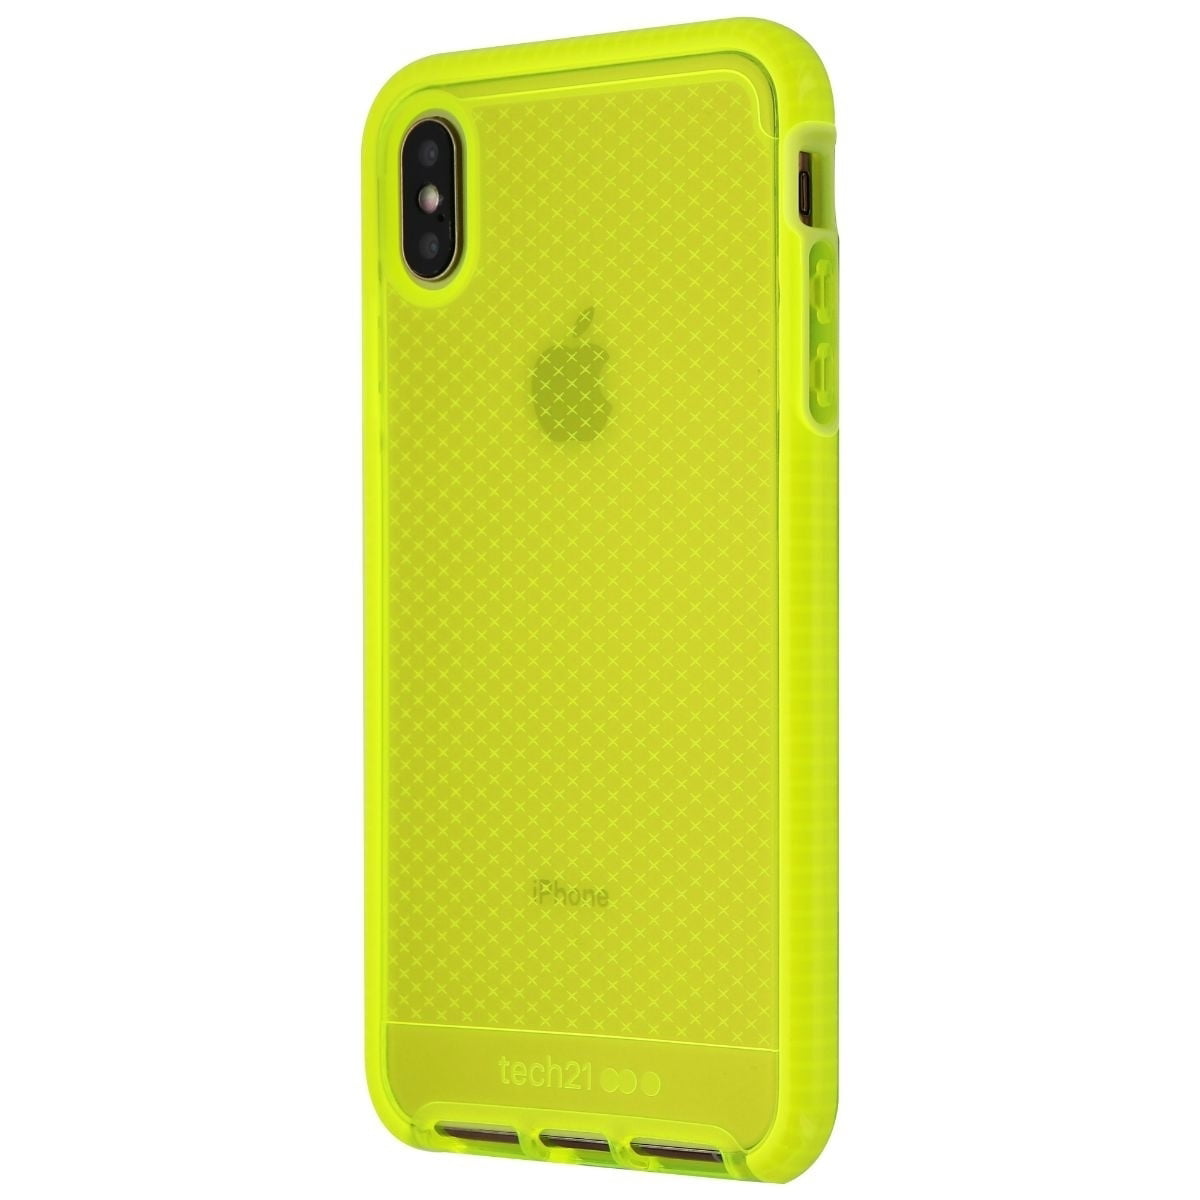 Tech21 Evo Check Series Gel Case iPhone Max - Neon Yellow (Used) -